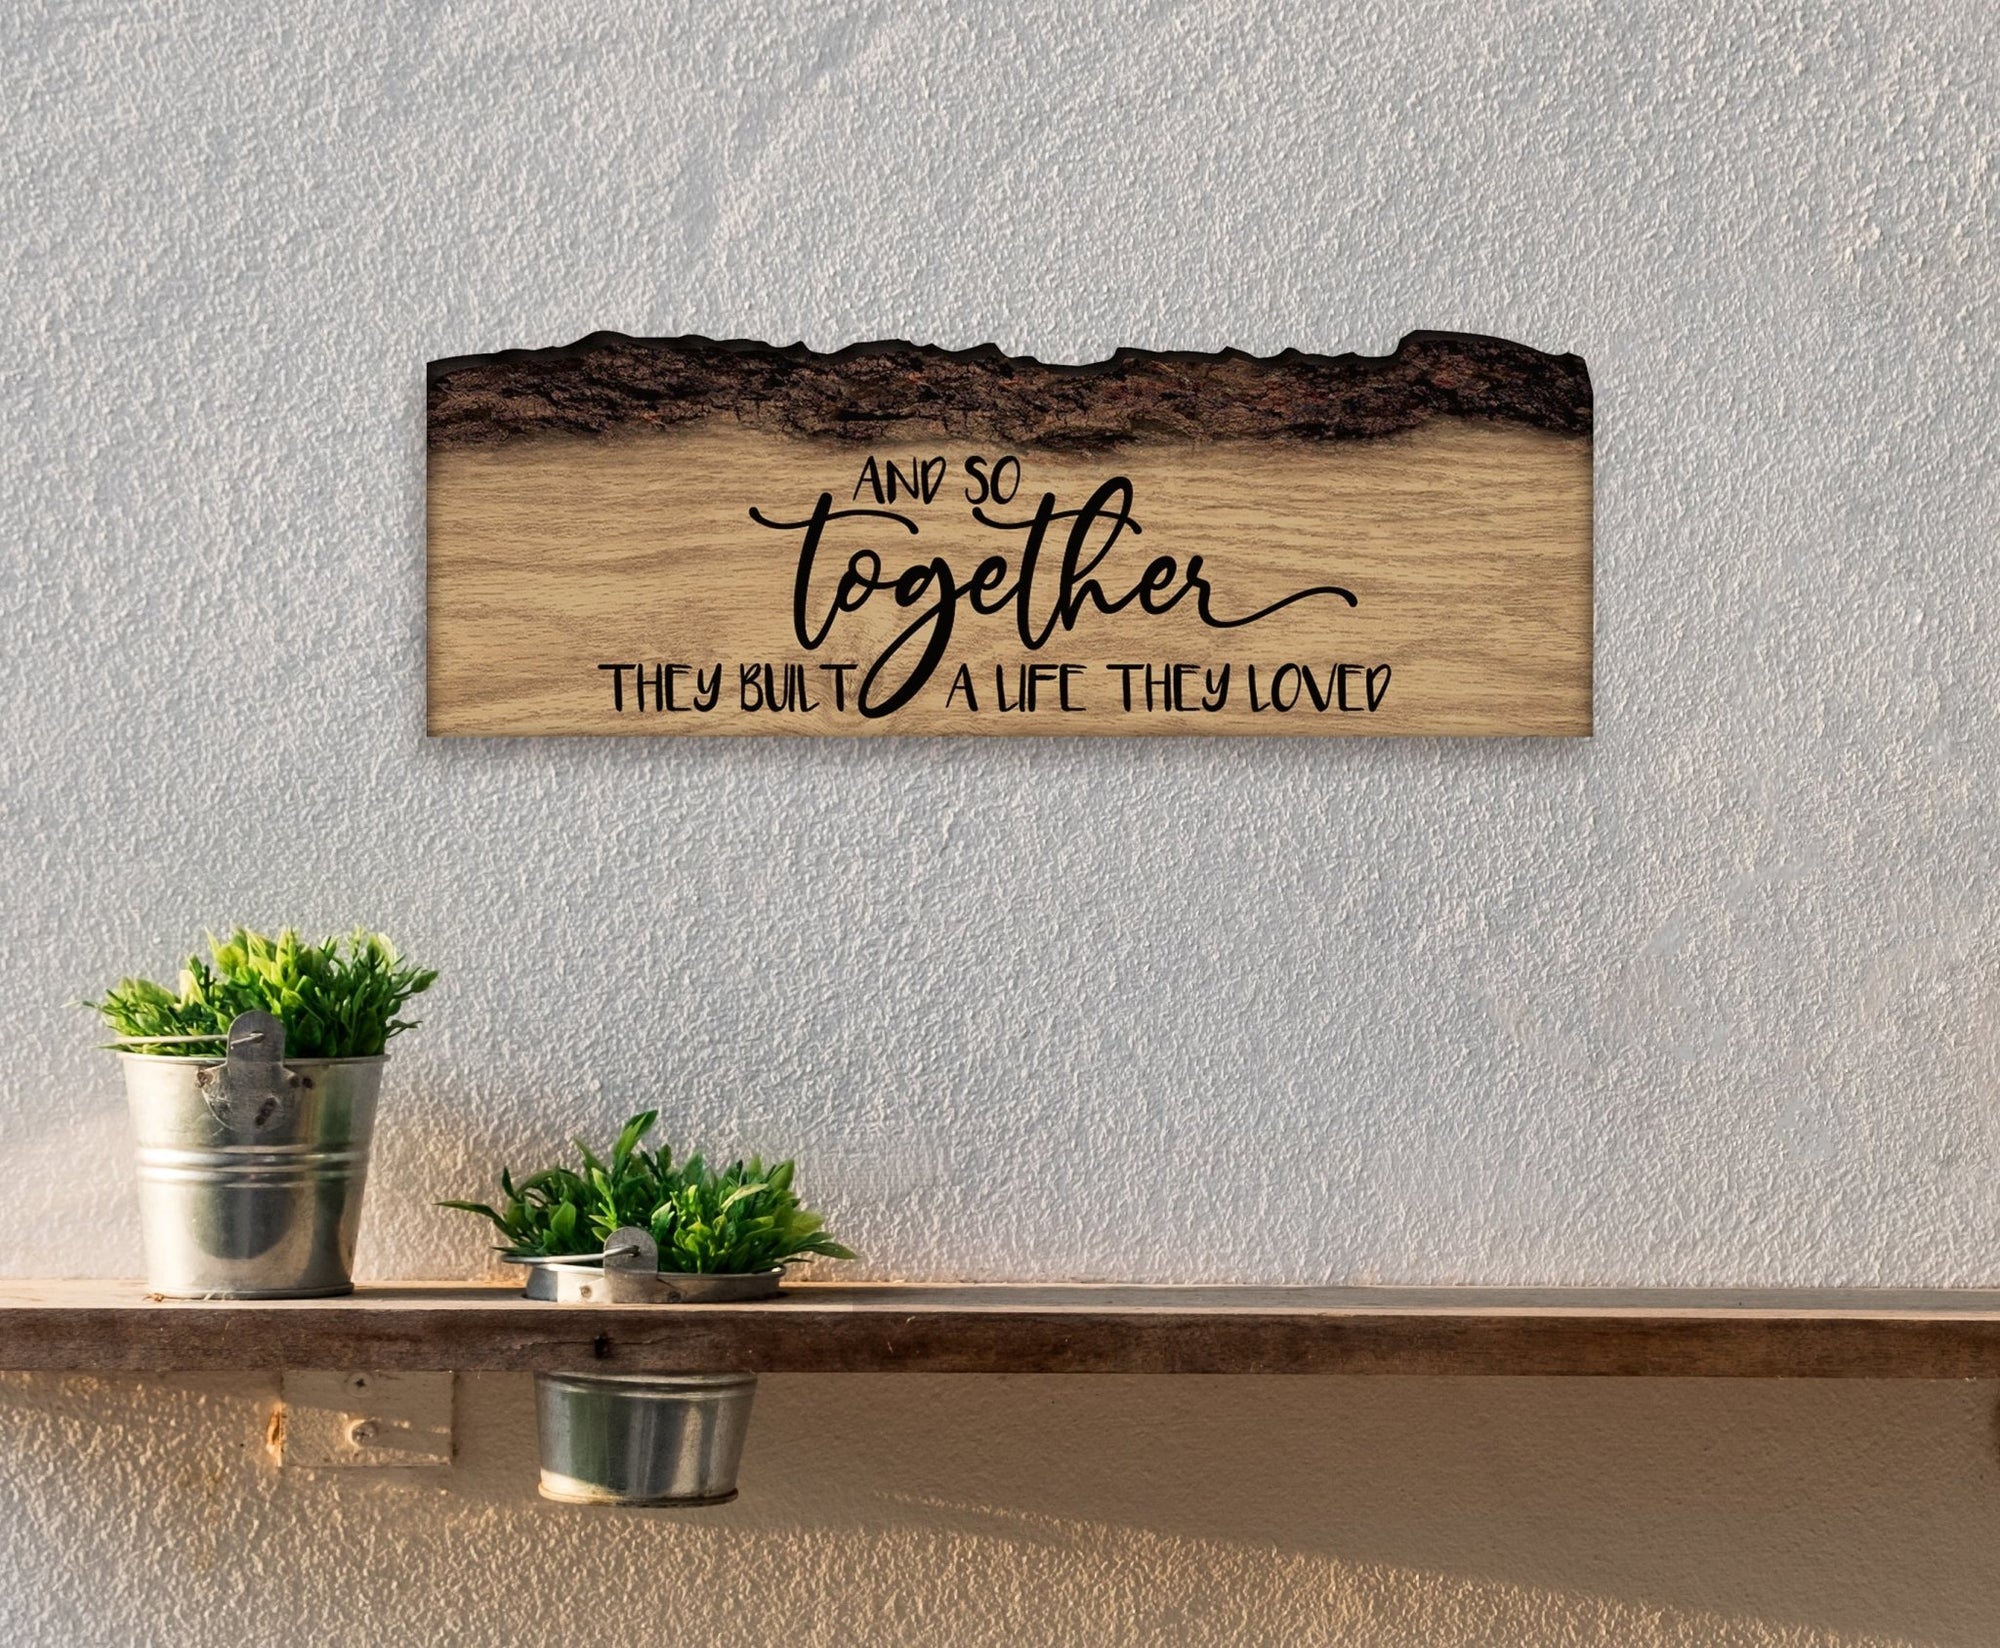 Digitally Printed Barky Wood Plaque 16x6 - And So Together - LifeSong Milestones